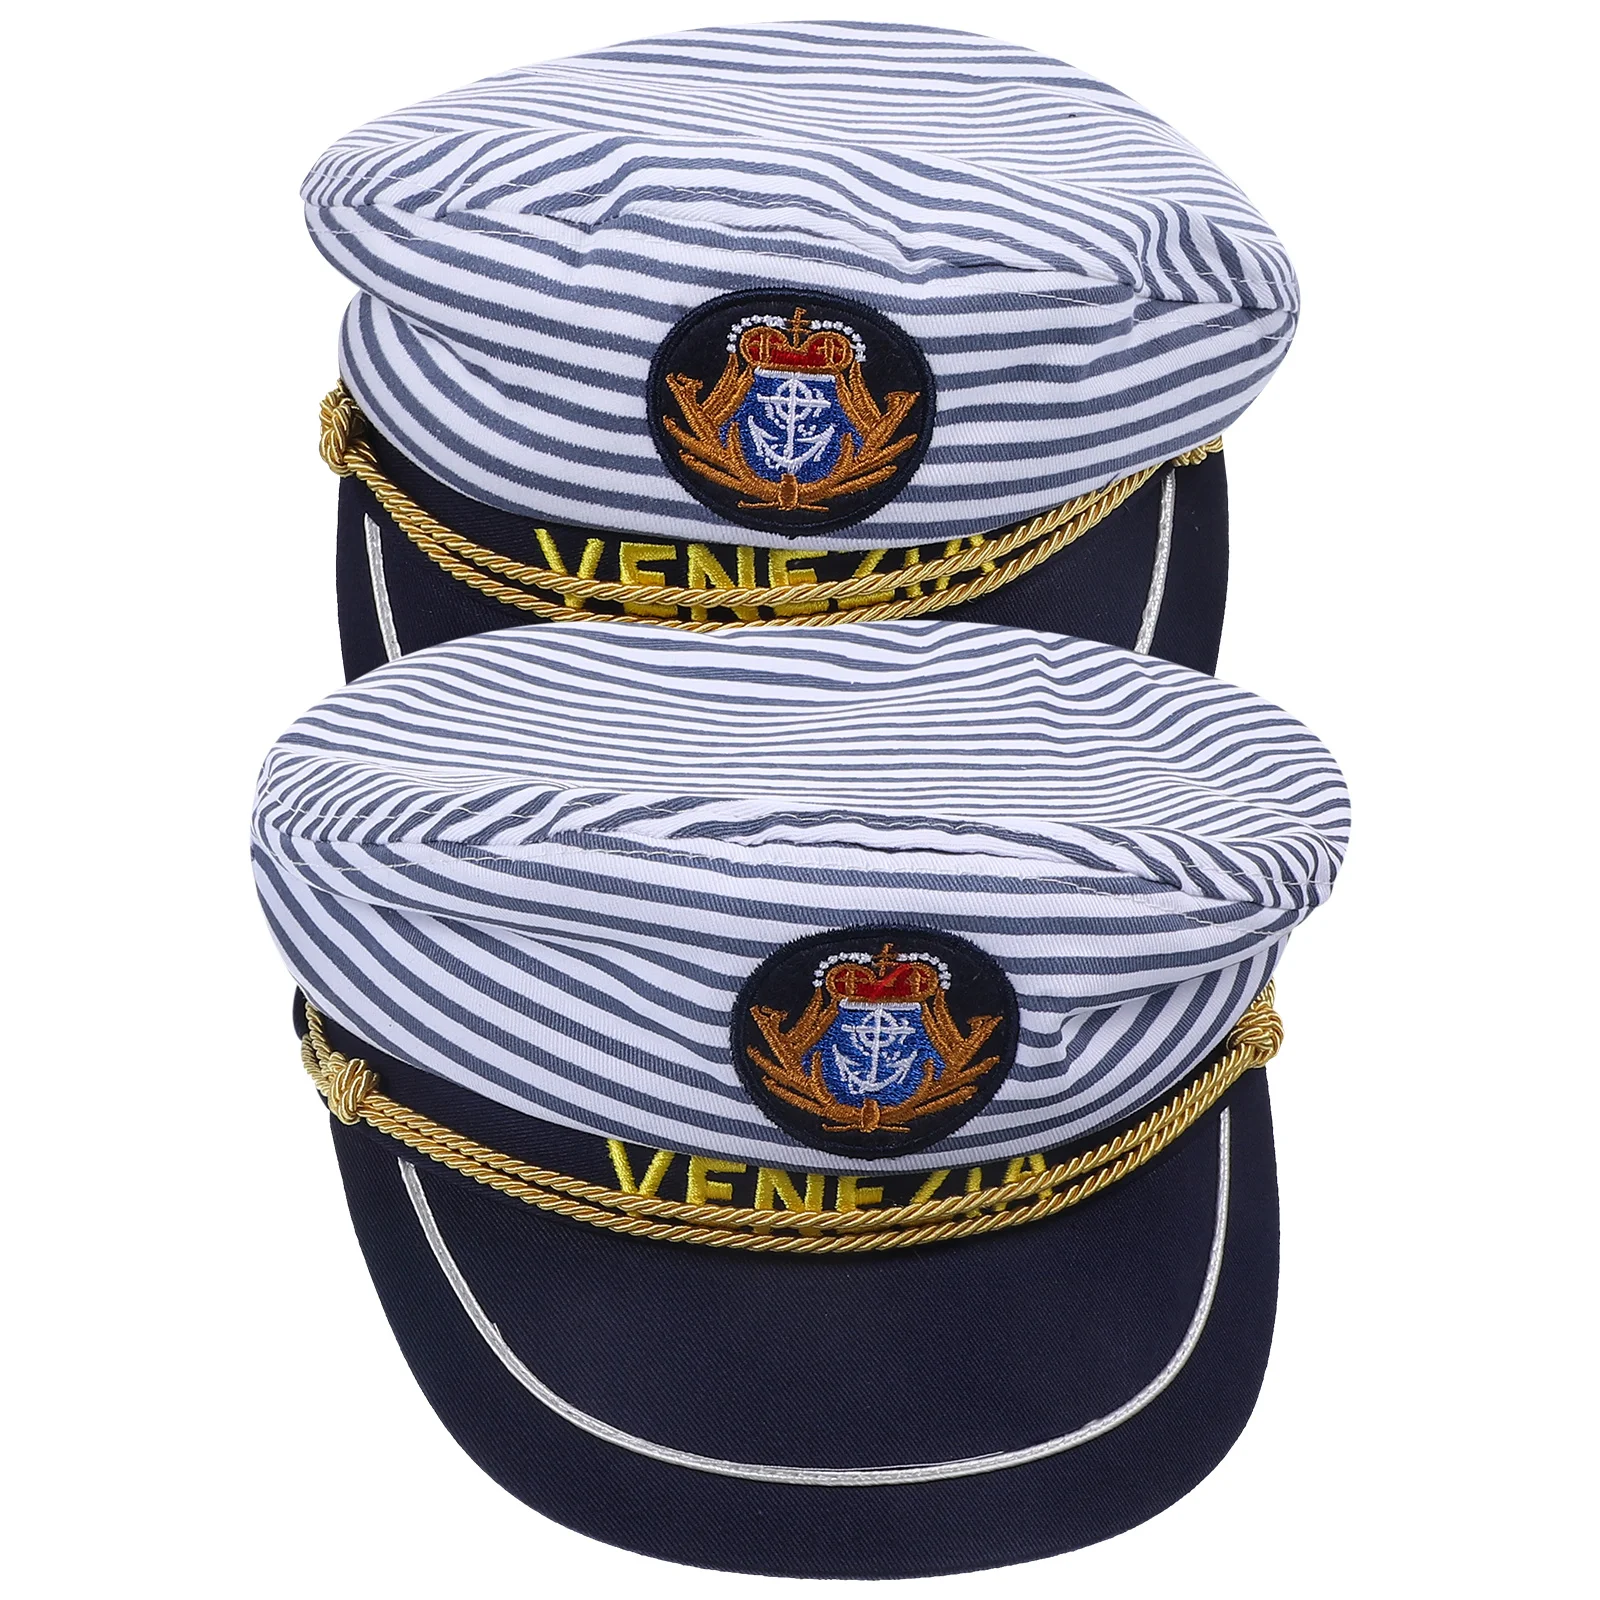 

2 Pcs Outdoor Decor Sailor Hat Women Captain Berets Boat Captains Hats Boaters Cotton Boating Gifts Accessories Child Sailing